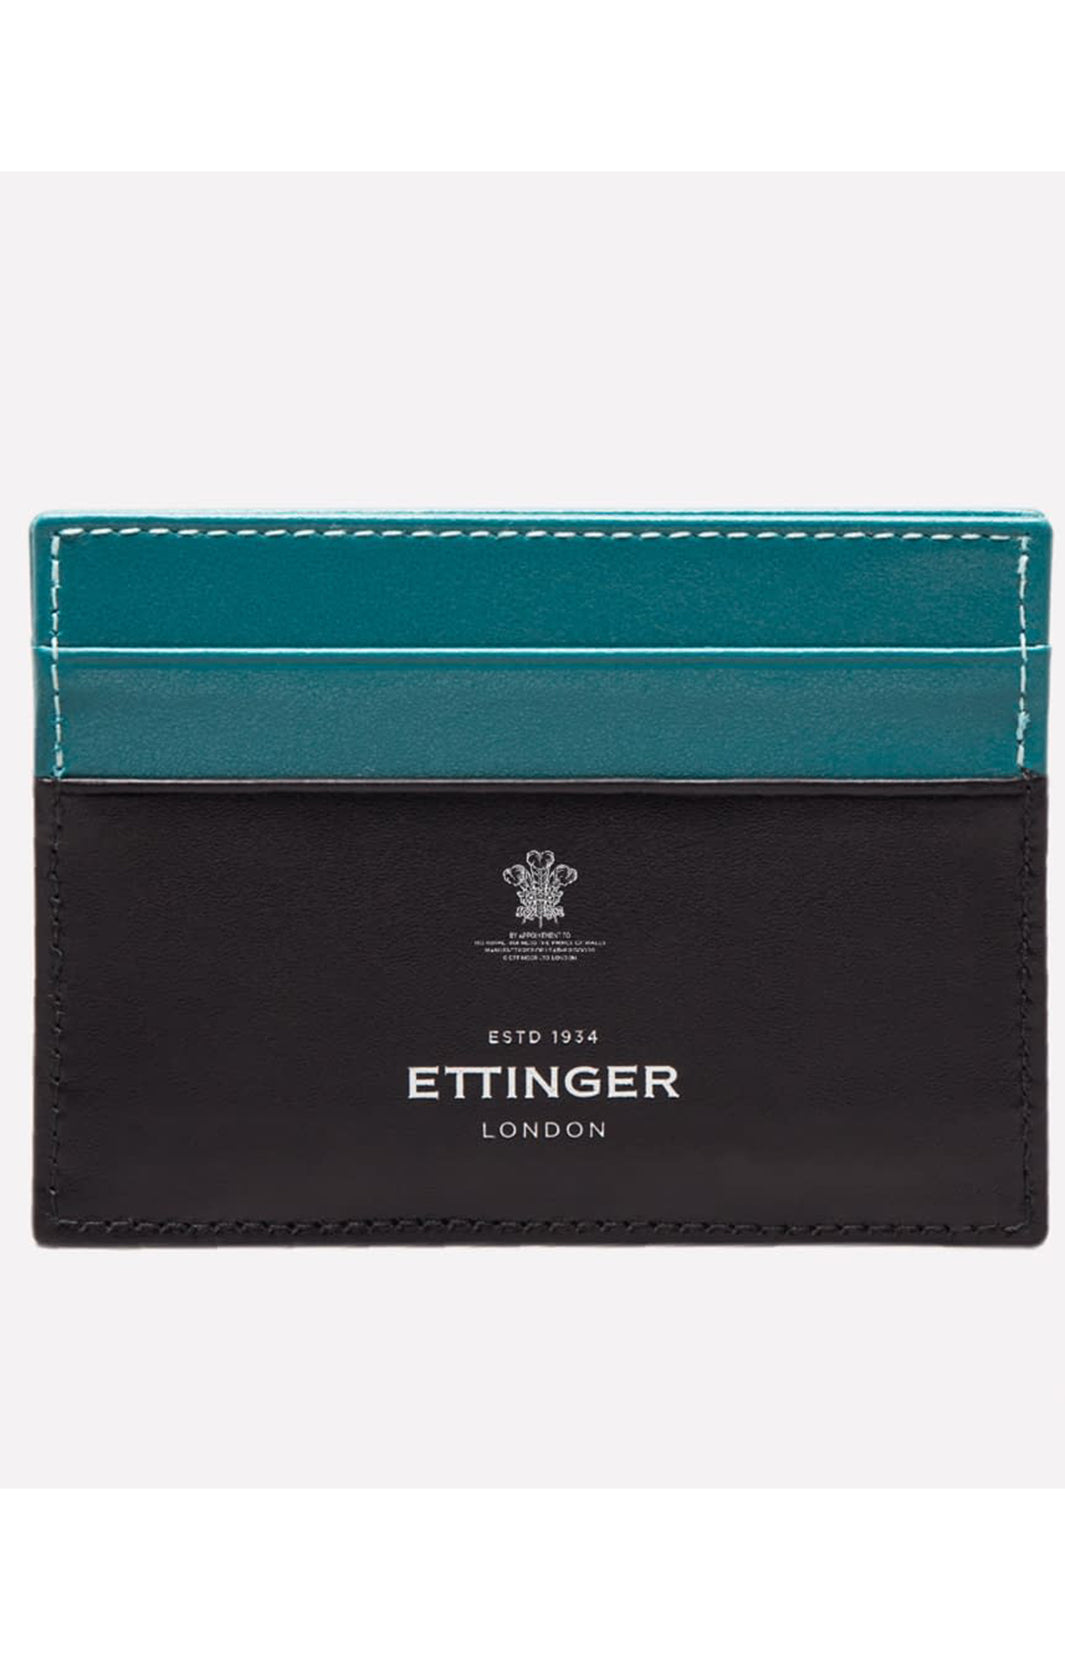 STERLING FLAT CREDIT CARD CASE - TURQUOISE